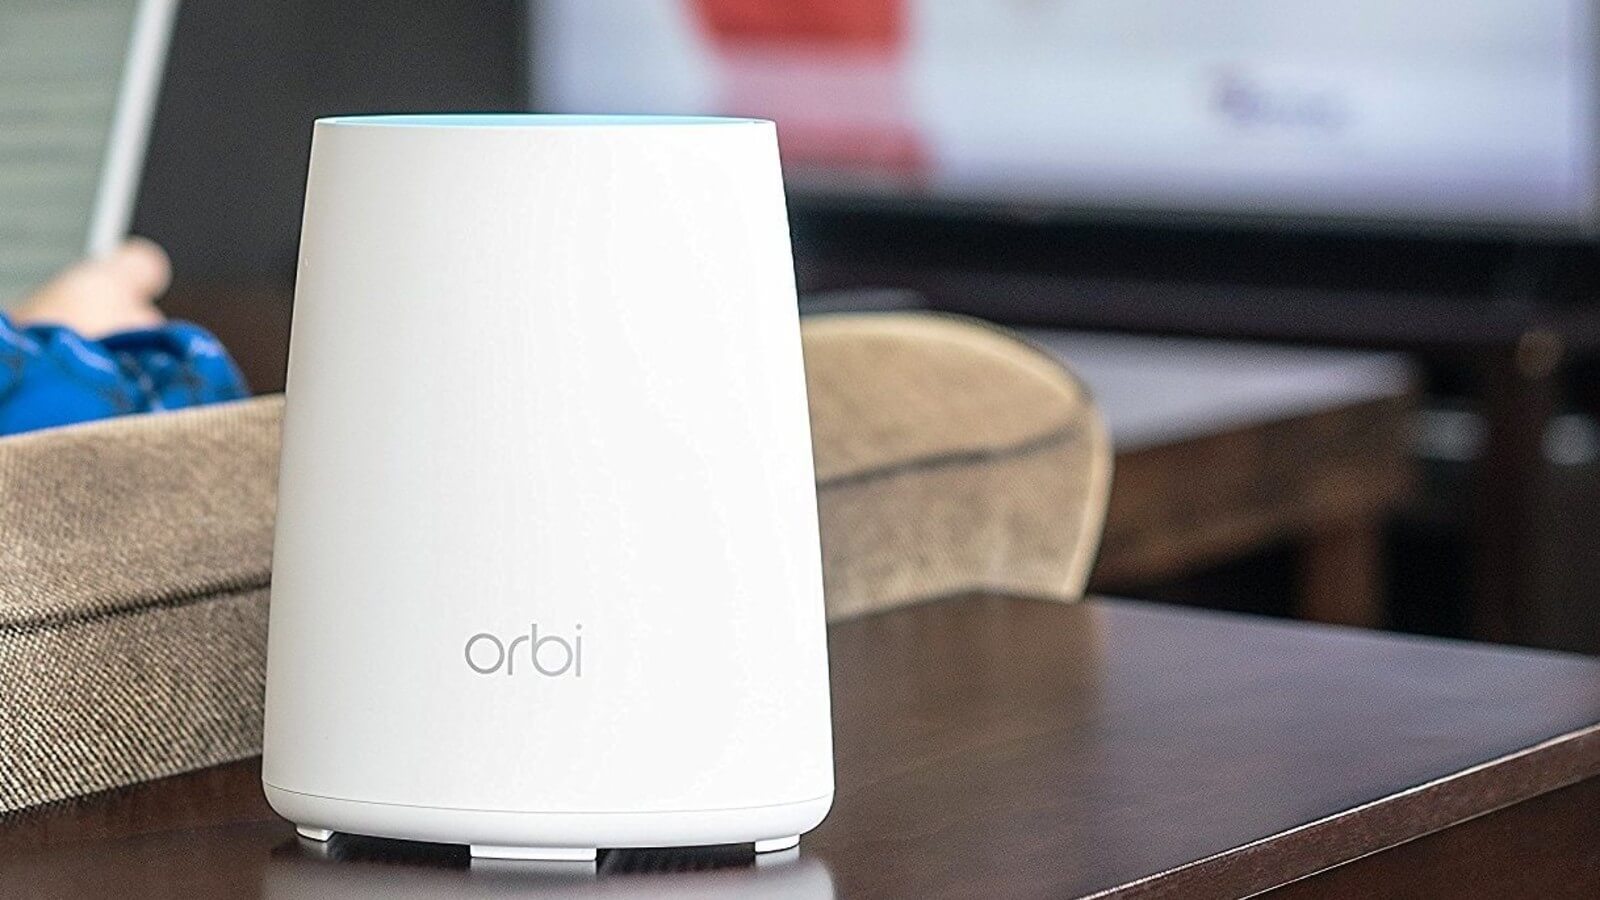 How to Setup Orbi Router and Satellite - Ultimate Guide